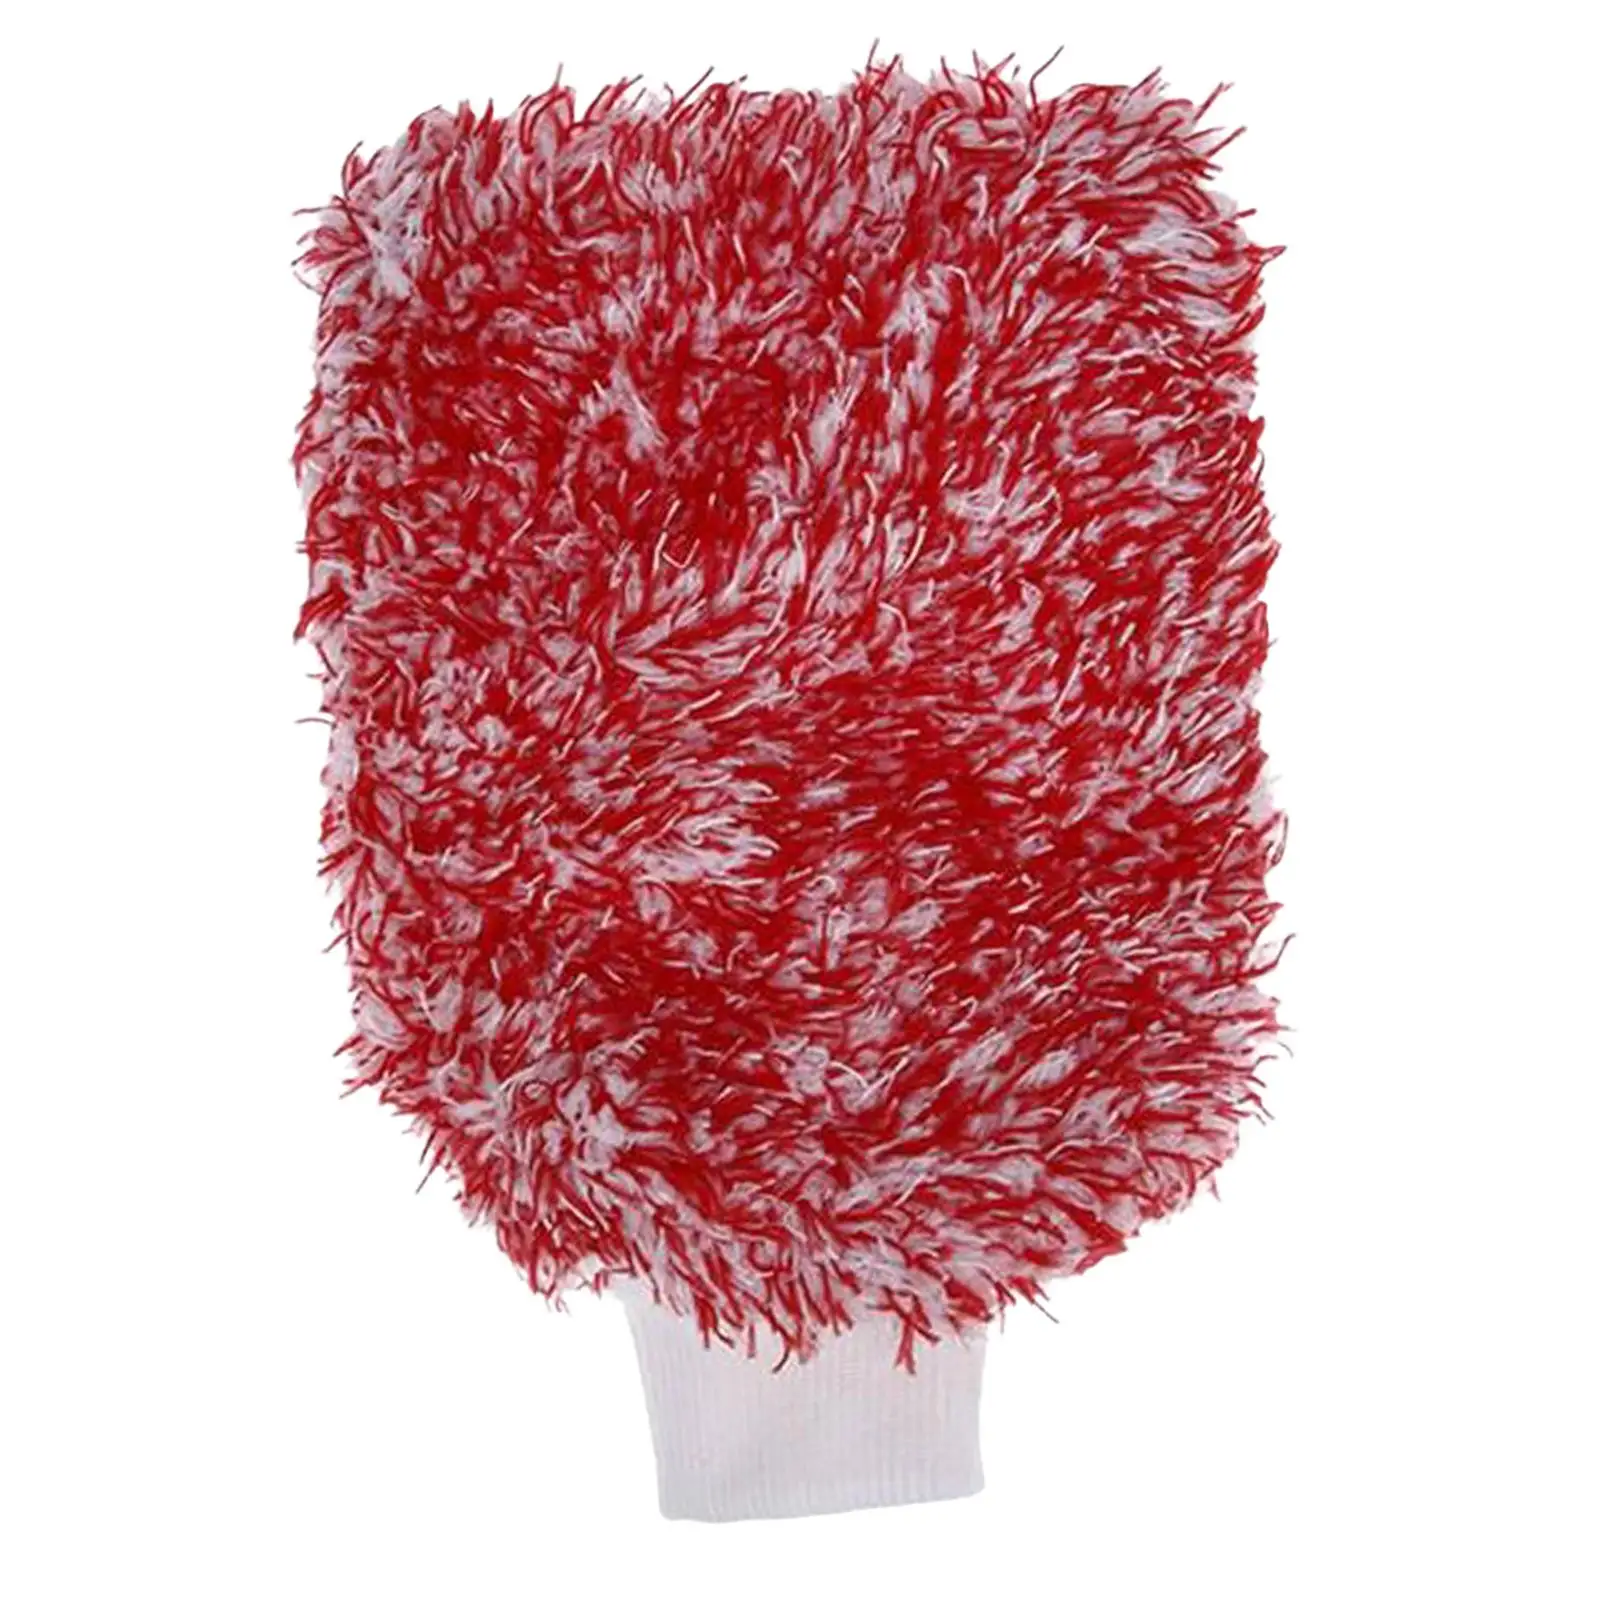 Car Wash Mitt Holds Tons of Sudsy Water Effective Washing Microfiber Soft Absorbent Lint Free Washing Glove for Trucks Cars